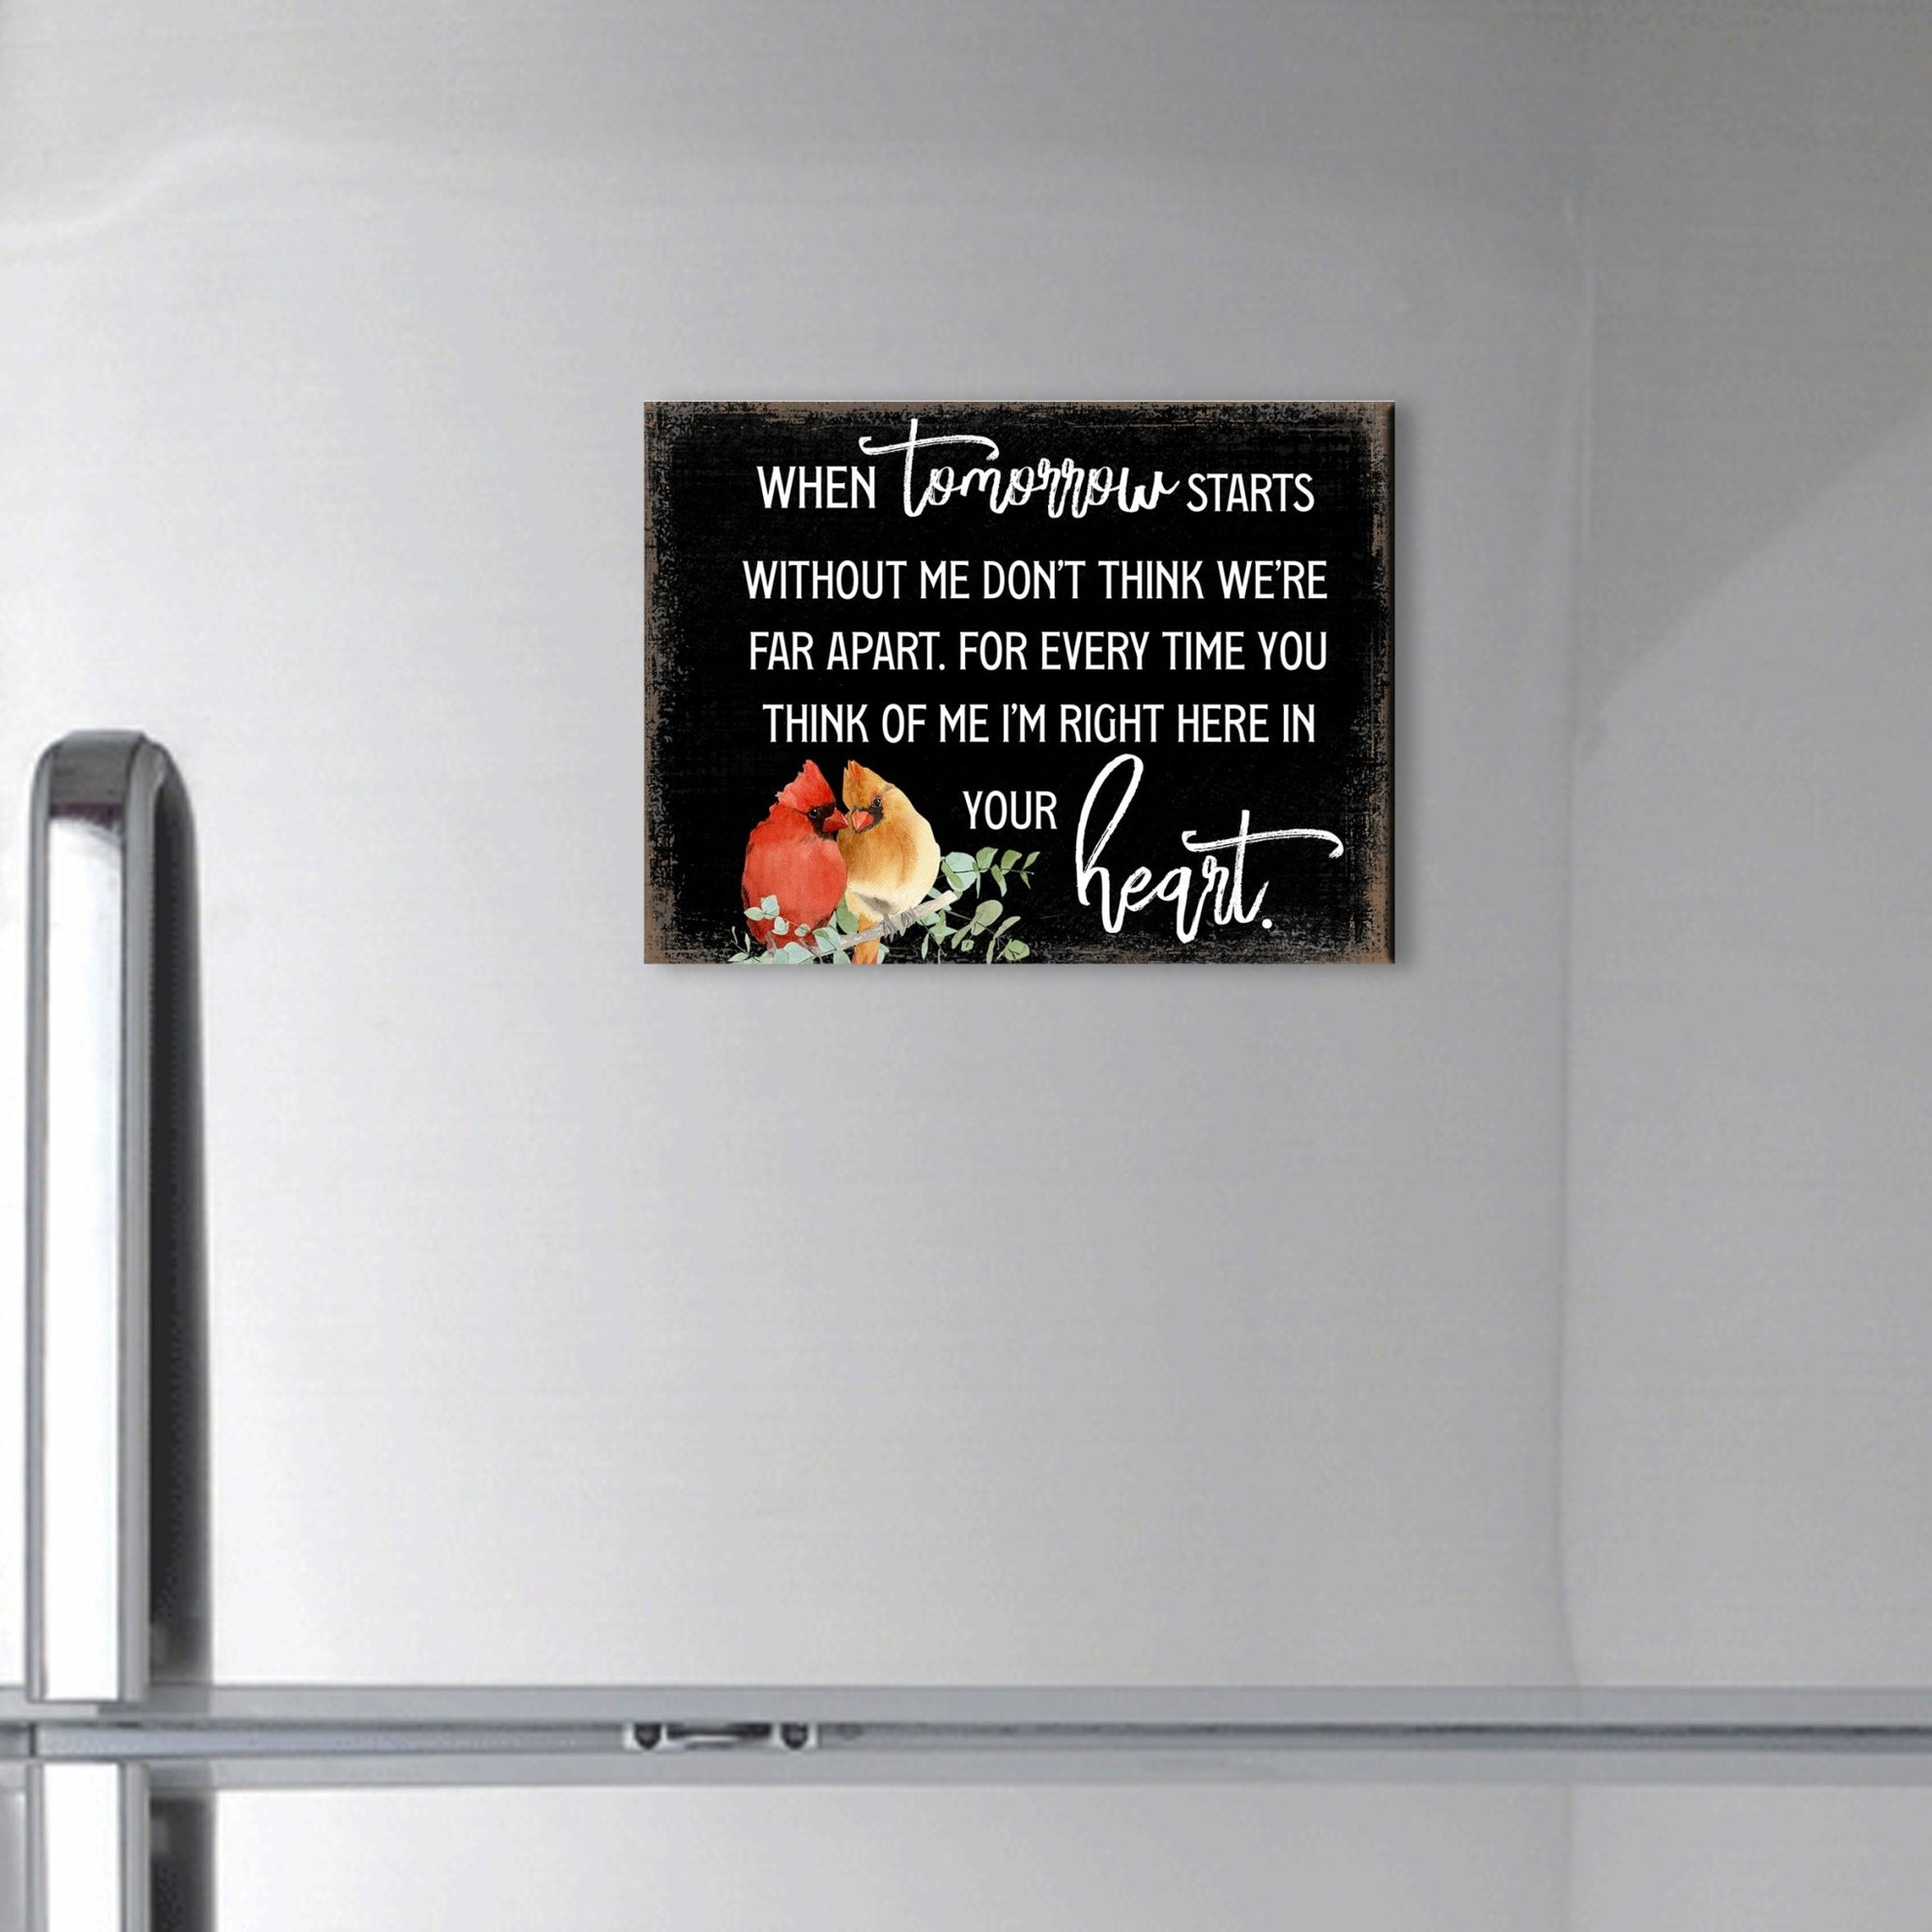 Lifesong Milestones Modern Cardinal Memorial Magnet: A thoughtful and elegant cardinal gift for your loved one's memory.